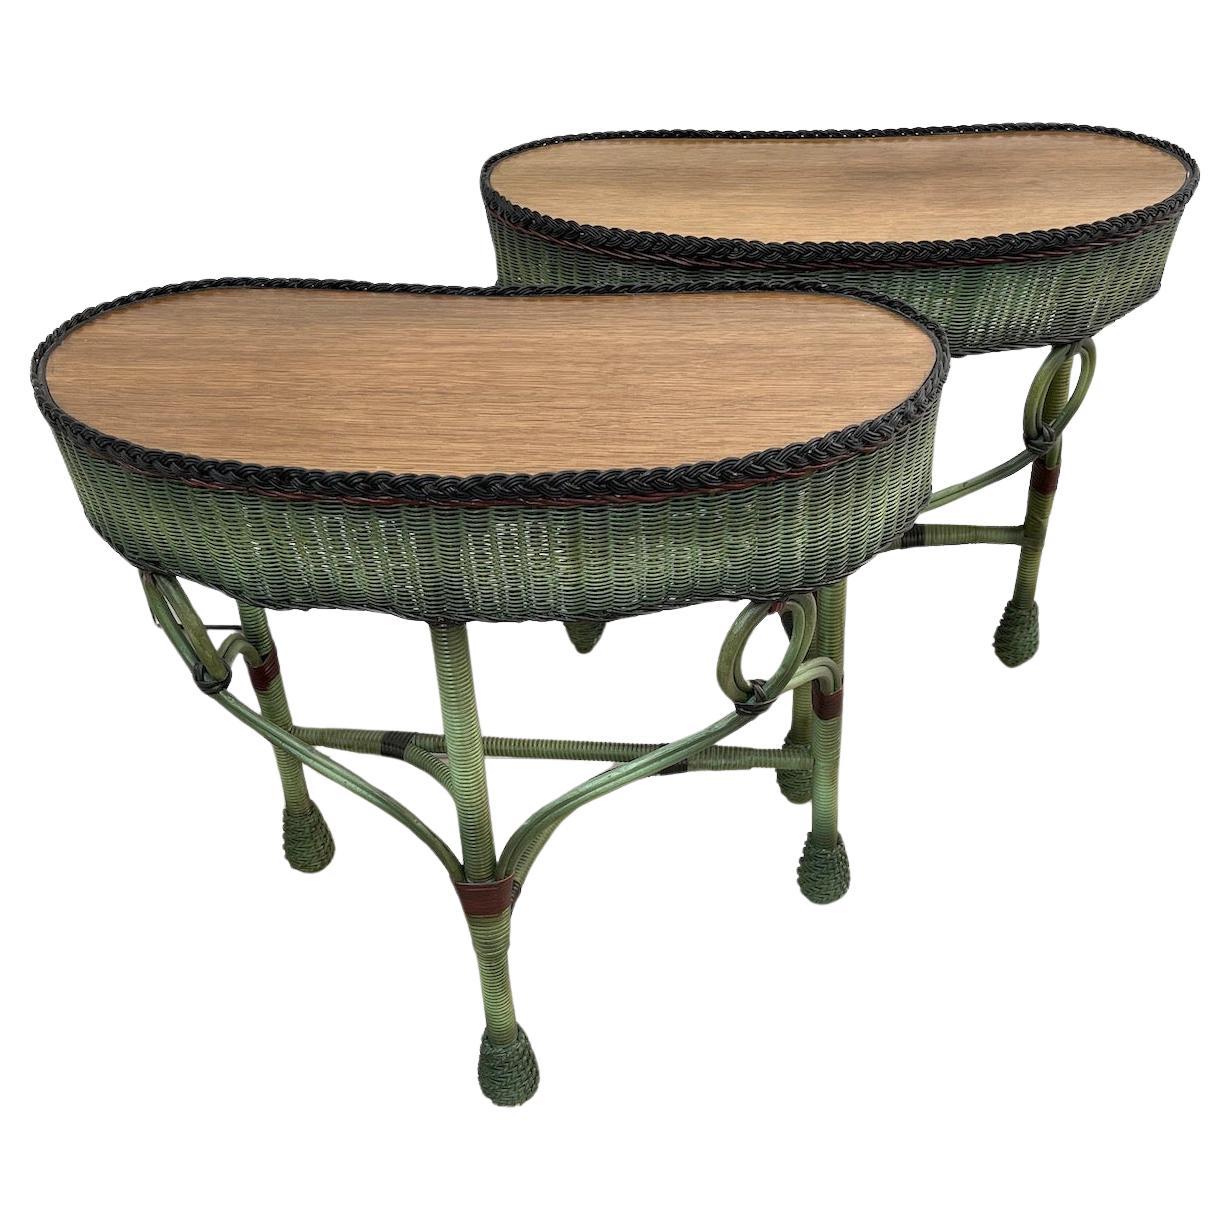  A unique matched pair of kidney shaped wicker three legged side tables labeled Heywood Wakefield Company, Gardner Ma. The tables  are done in a lovely shaded French green finish with black braid and red and black decorative accents, Each piece has